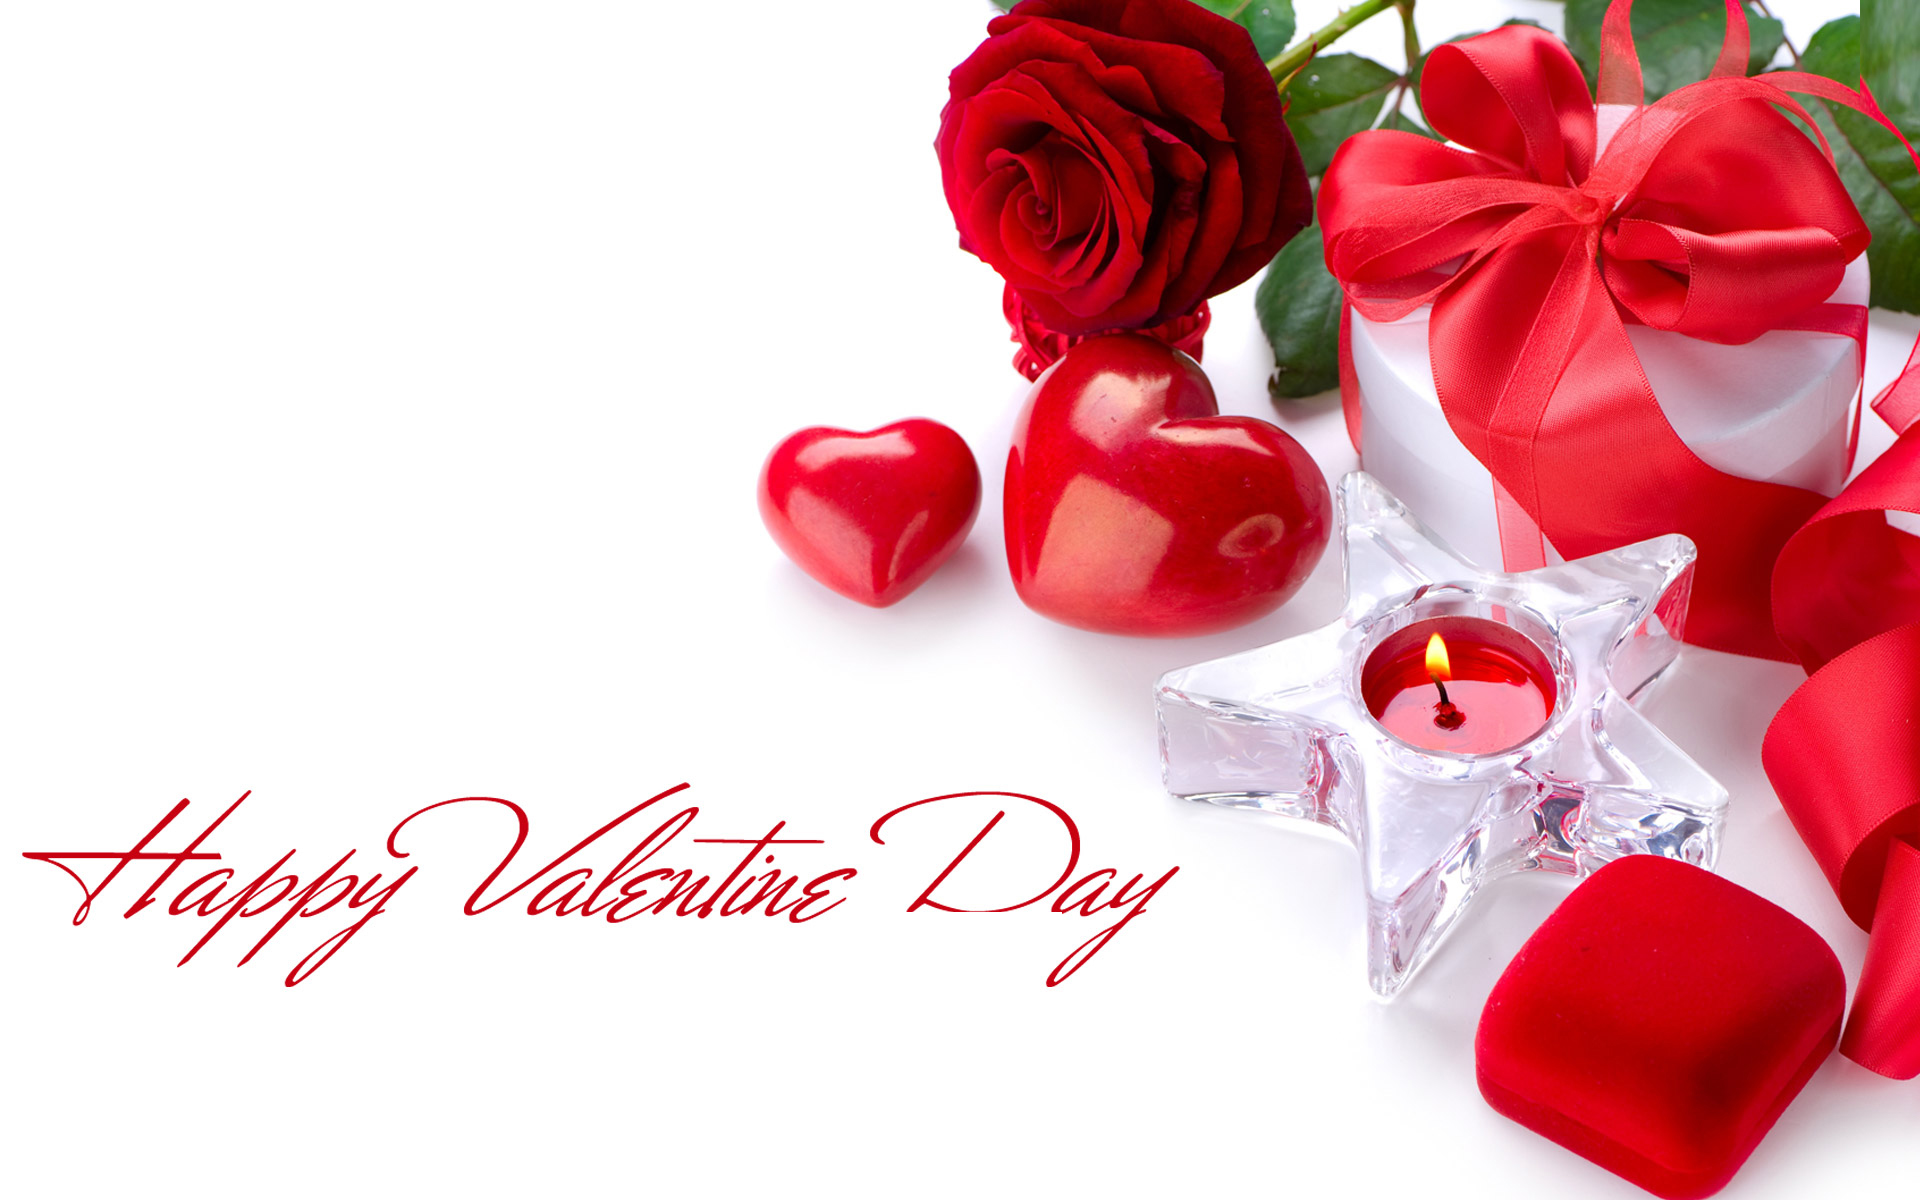 Romantic Valentine's Day Wishes And Heartfelt Love Messages0